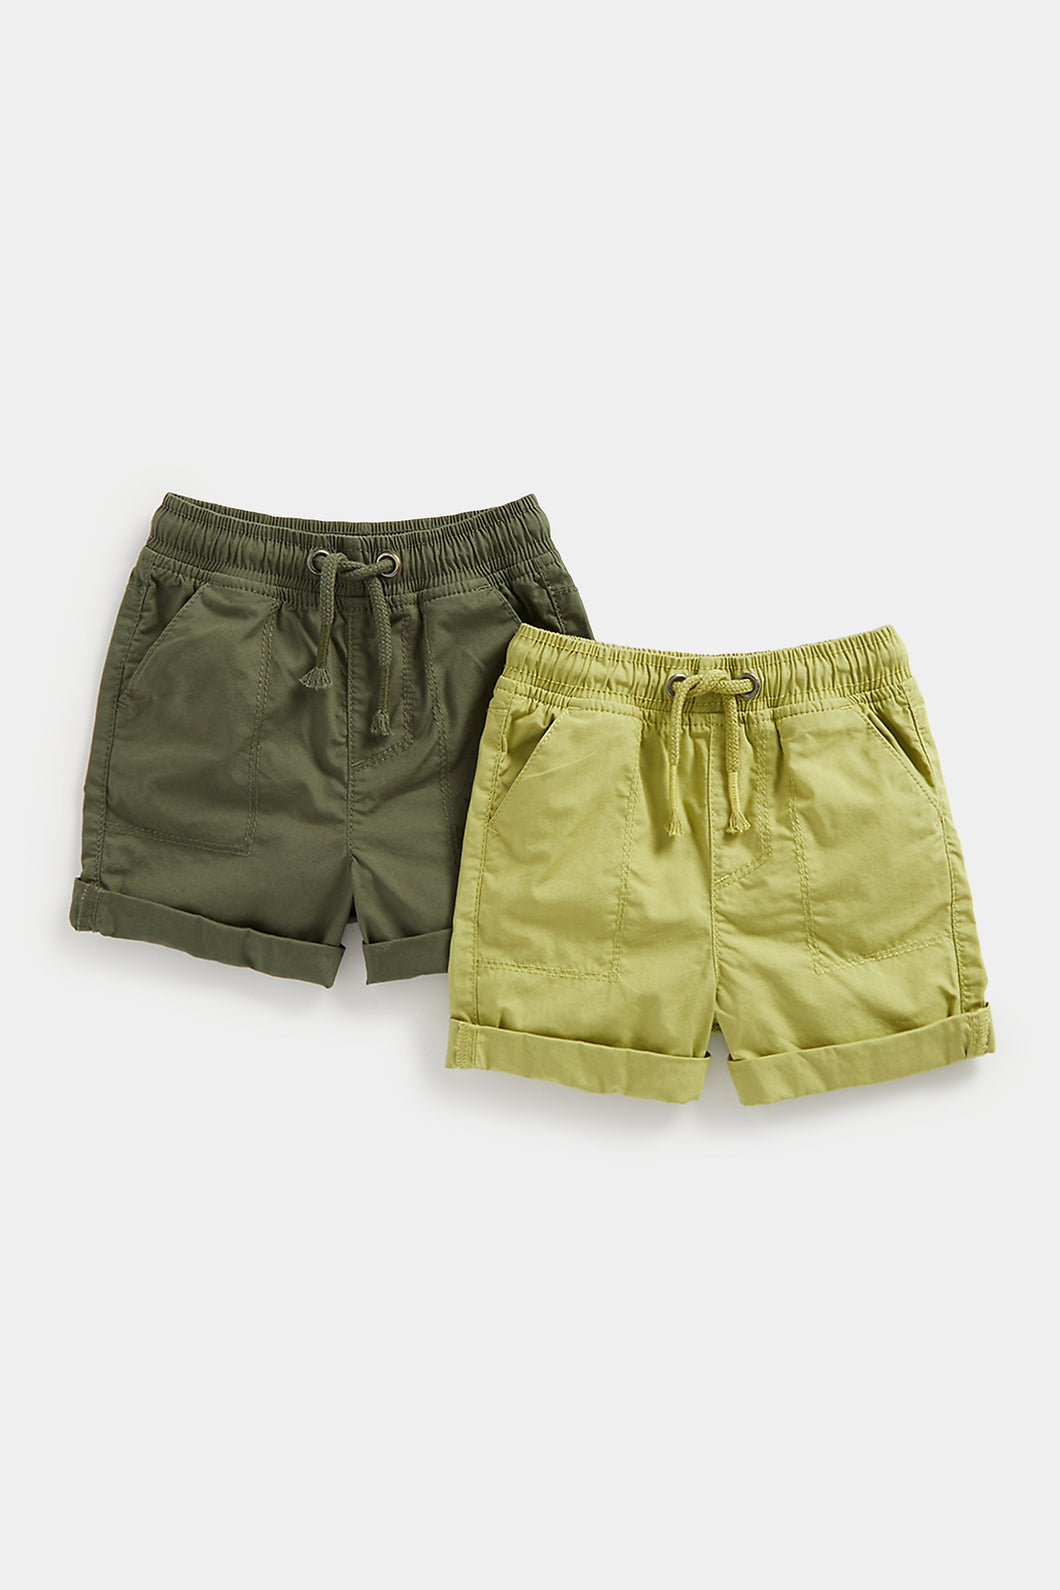 Mothercare Poplin Cotton Shorts - 2 Pack